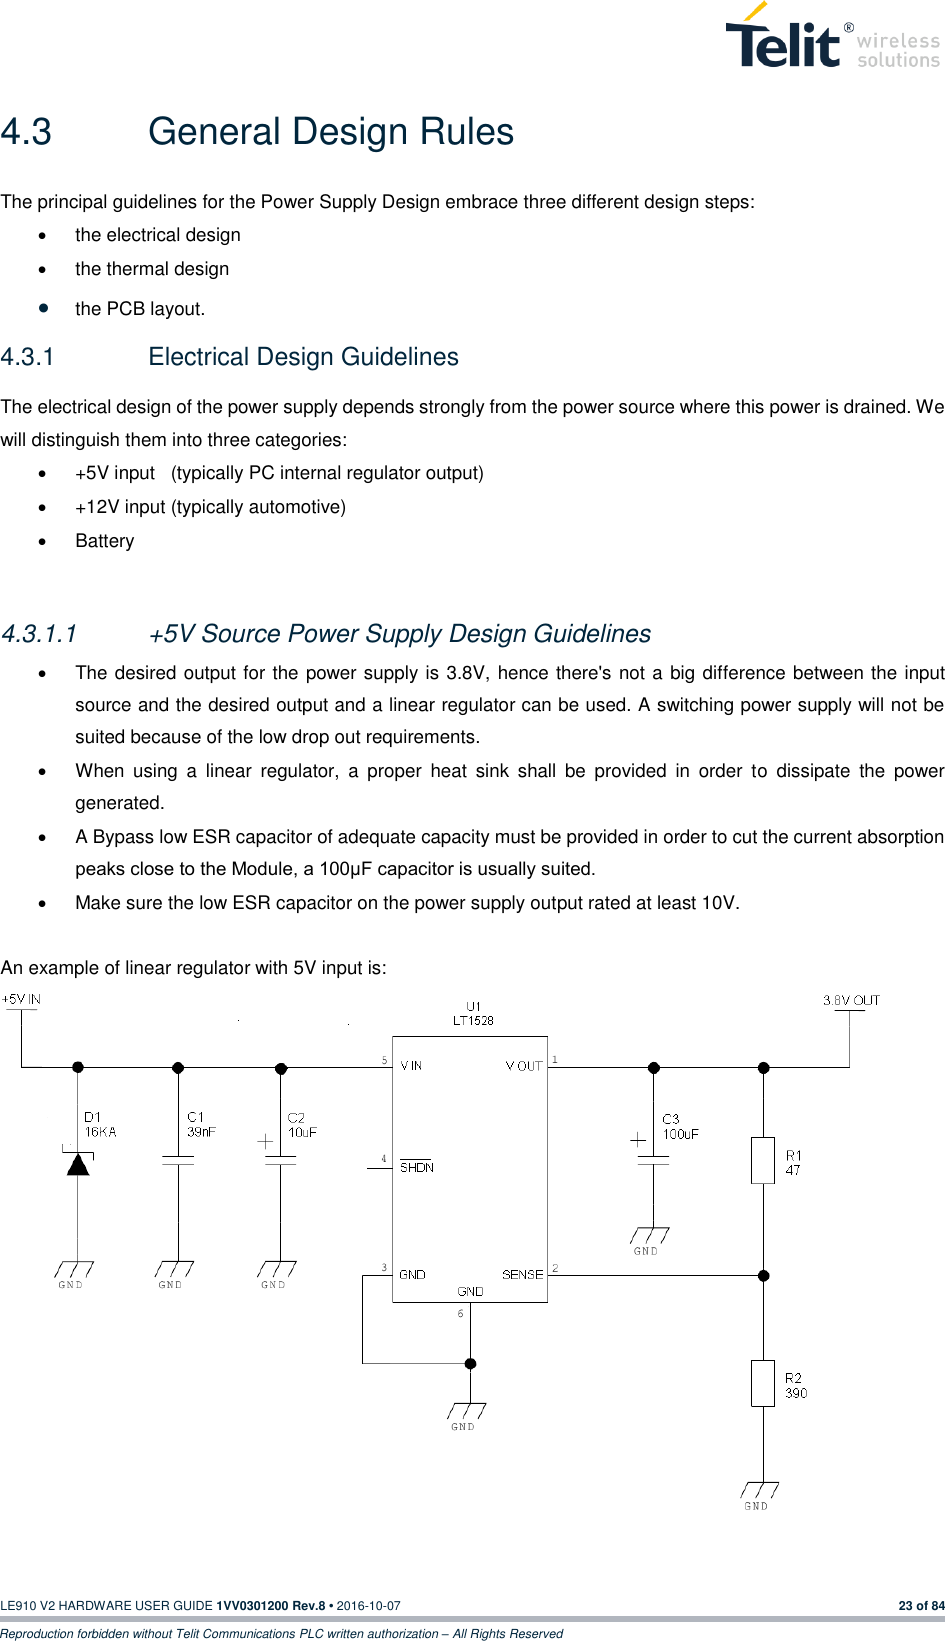   LE910 V2 HARDWARE USER GUIDE 1VV0301200 Rev.8 • 2016-10-07 23 of 84 Reproduction forbidden without Telit Communications PLC written authorization – All Rights Reserved 4.3  General Design Rules The principal guidelines for the Power Supply Design embrace three different design steps:   the electrical design   the thermal design  the PCB layout. 4.3.1  Electrical Design Guidelines The electrical design of the power supply depends strongly from the power source where this power is drained. We will distinguish them into three categories:   +5V input   (typically PC internal regulator output)   +12V input (typically automotive)   Battery  4.3.1.1  +5V Source Power Supply Design Guidelines   The desired output for the power supply is 3.8V, hence there&apos;s not a big difference between the input source and the desired output and a linear regulator can be used. A switching power supply will not be suited because of the low drop out requirements.   When  using  a  linear  regulator,  a  proper  heat  sink  shall  be  provided  in  order  to  dissipate  the  power generated.   A Bypass low ESR capacitor of adequate capacity must be provided in order to cut the current absorption peaks close to the Module, a 100μF capacitor is usually suited.   Make sure the low ESR capacitor on the power supply output rated at least 10V.  An example of linear regulator with 5V input is:    